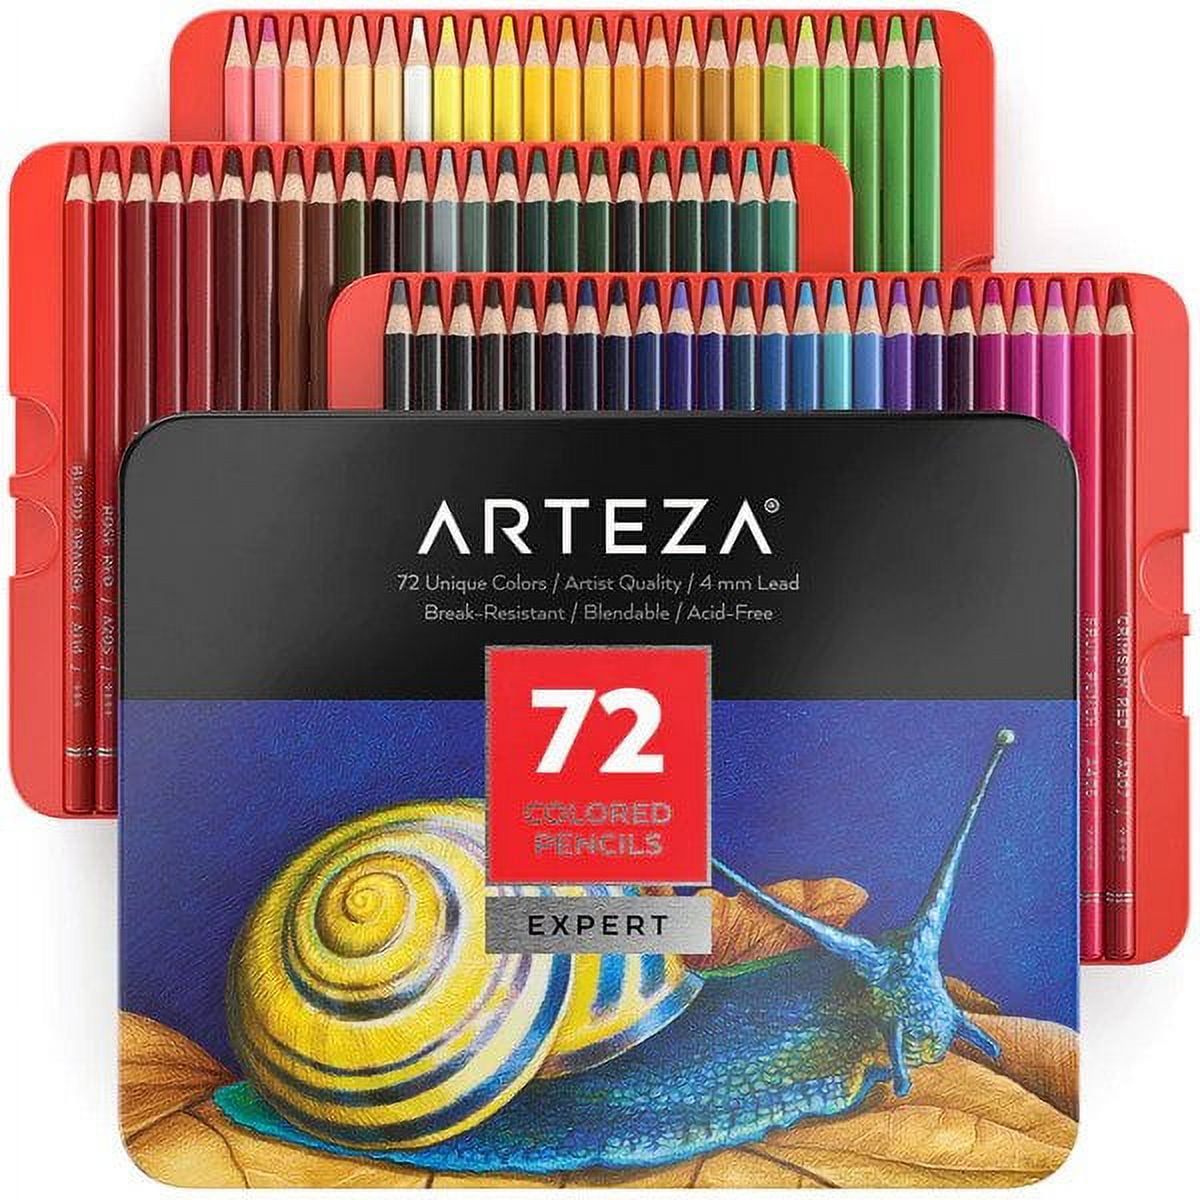 Castle Art Supplies Gold Standard 72 Coloring Pencils Set with Extras |  Quality Oil-based Colored Cores Stay Sharper, Tougher Against Breakage |  For